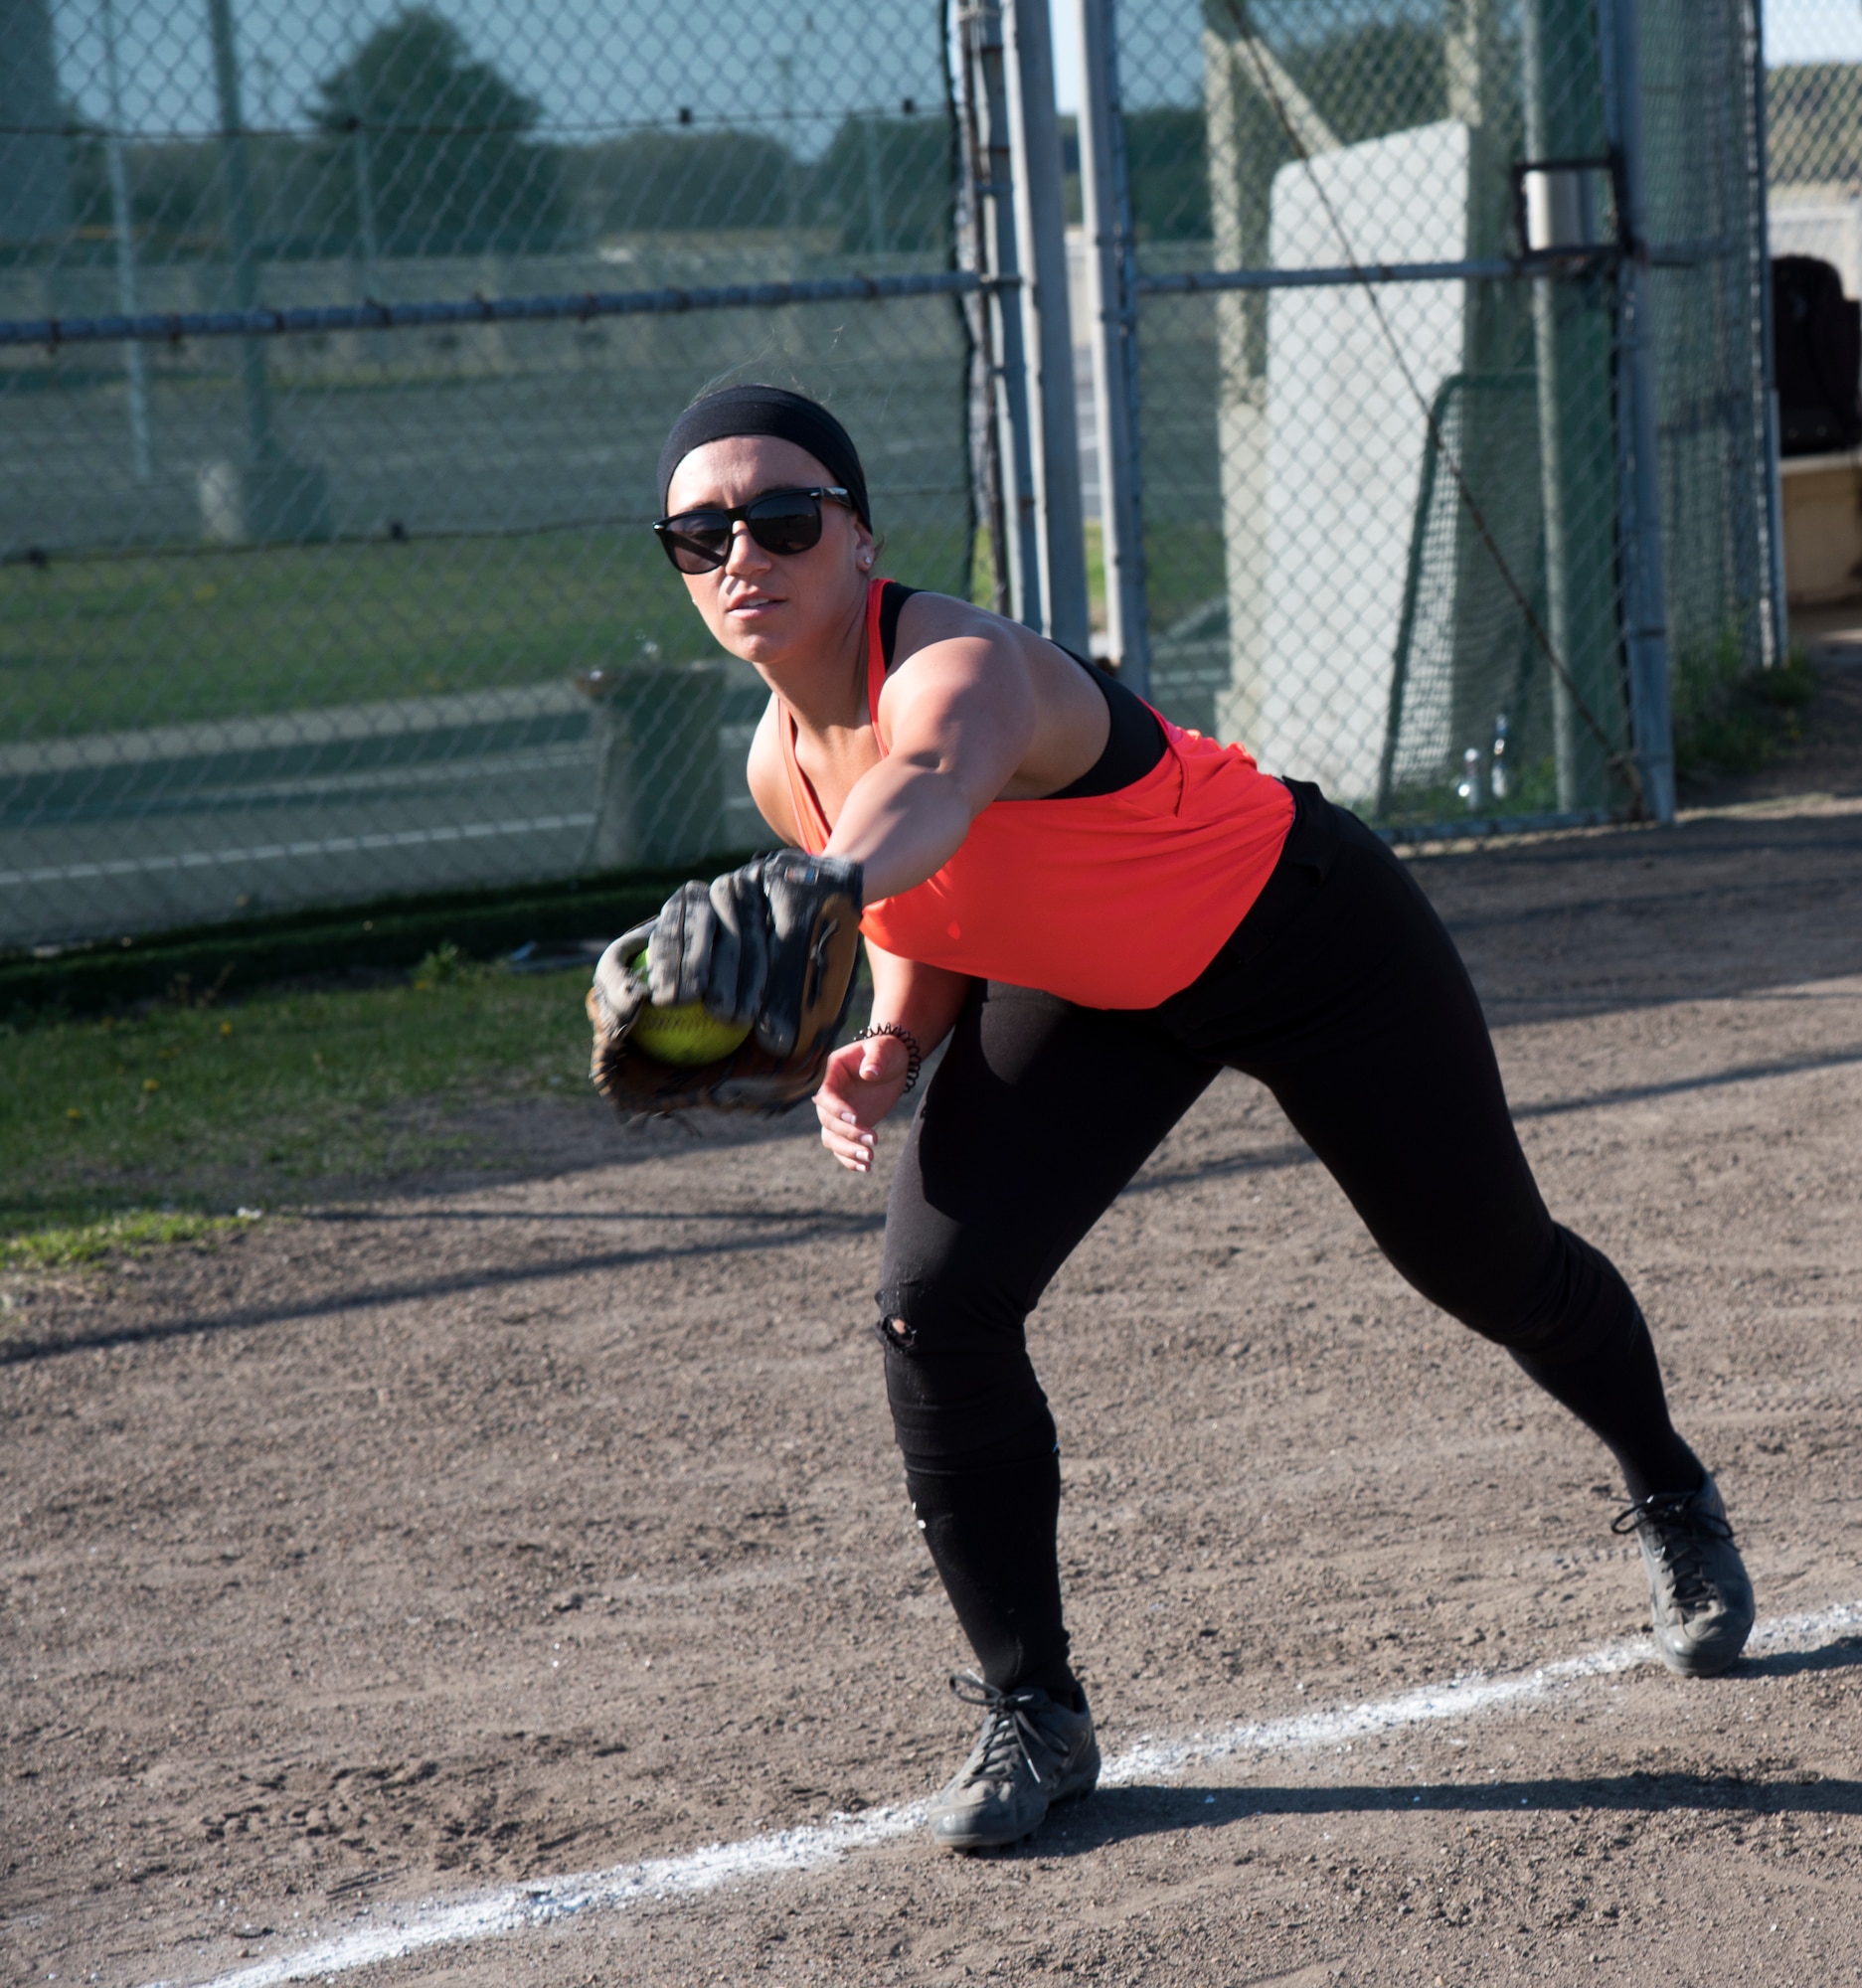 U.S. Air Force Staff Sgt. Danielle Clemons, a 35th Medical Operations Squadron primary care office manager, warms up before the 2019 Cinco de Mayo softball tournament by catching and throwing pitches at Misawa Air Base, Japan, May 4, 2019. Five teams competed giving Airmen the opportunity to connect with others and build team cohesion. (U.S. Air Force photo by Branden Yamada)